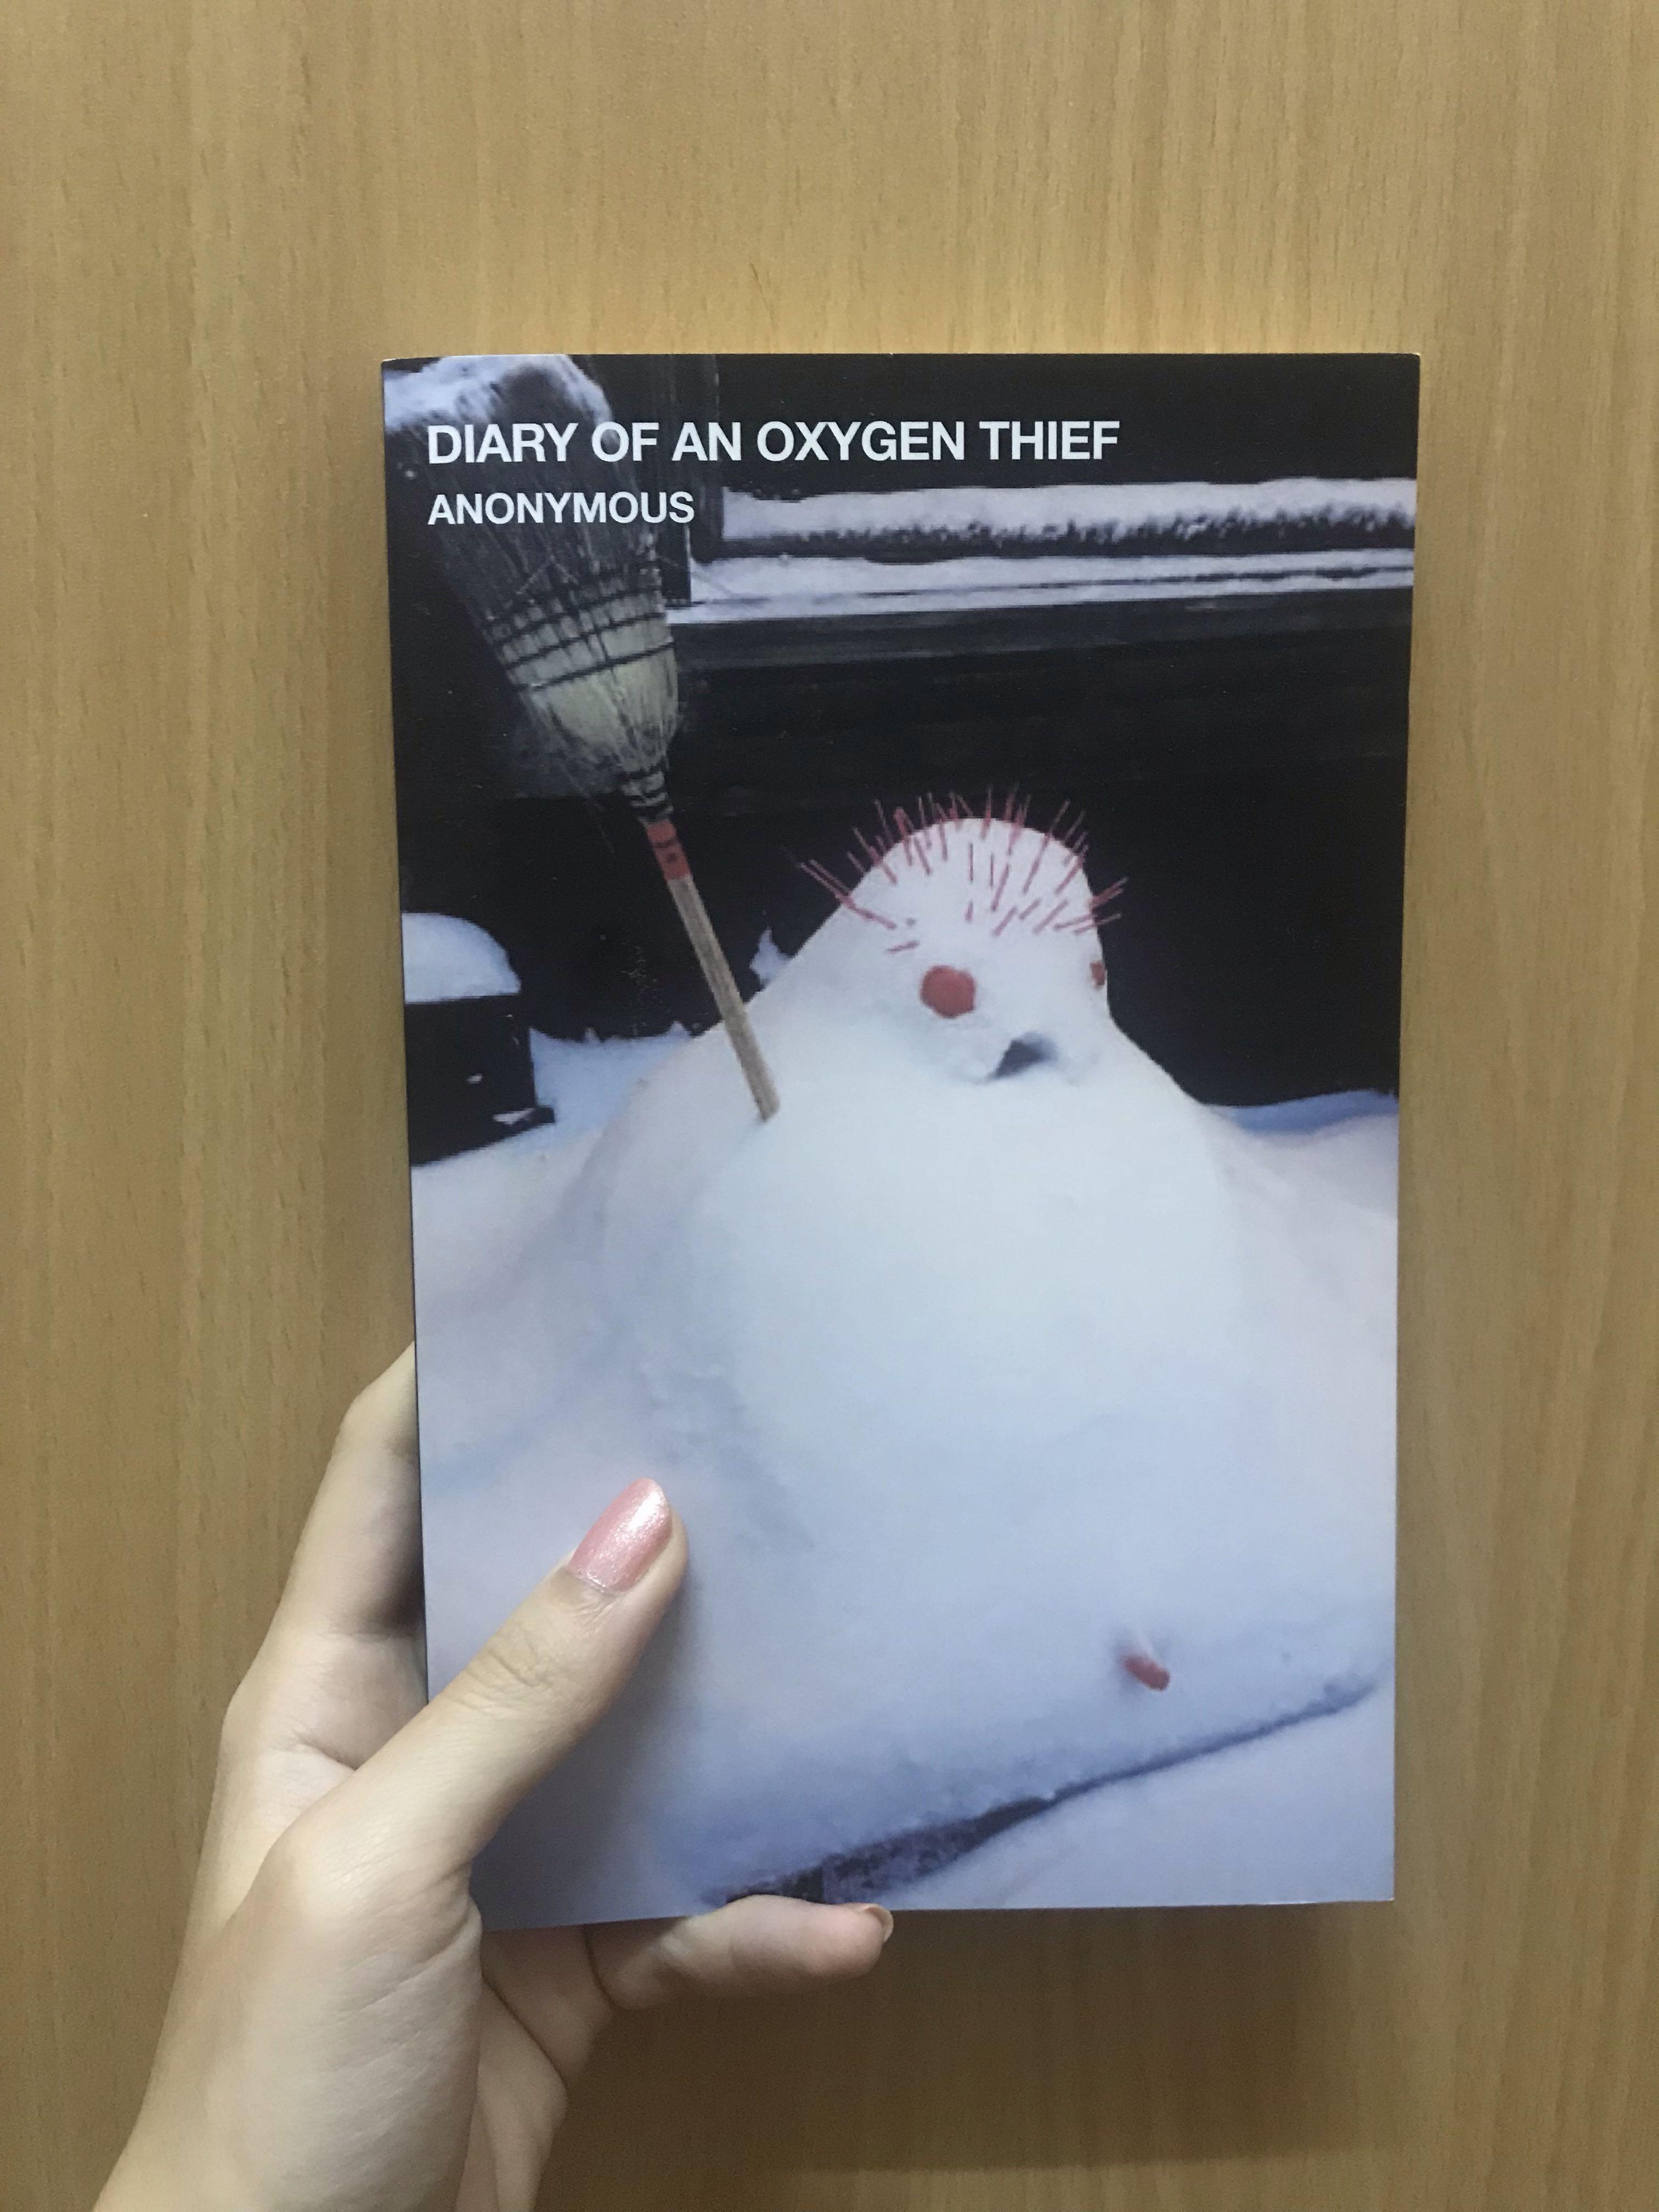 Book Anonymous Diary Of An Oxygen Thief Books Stationery Books On Carousell